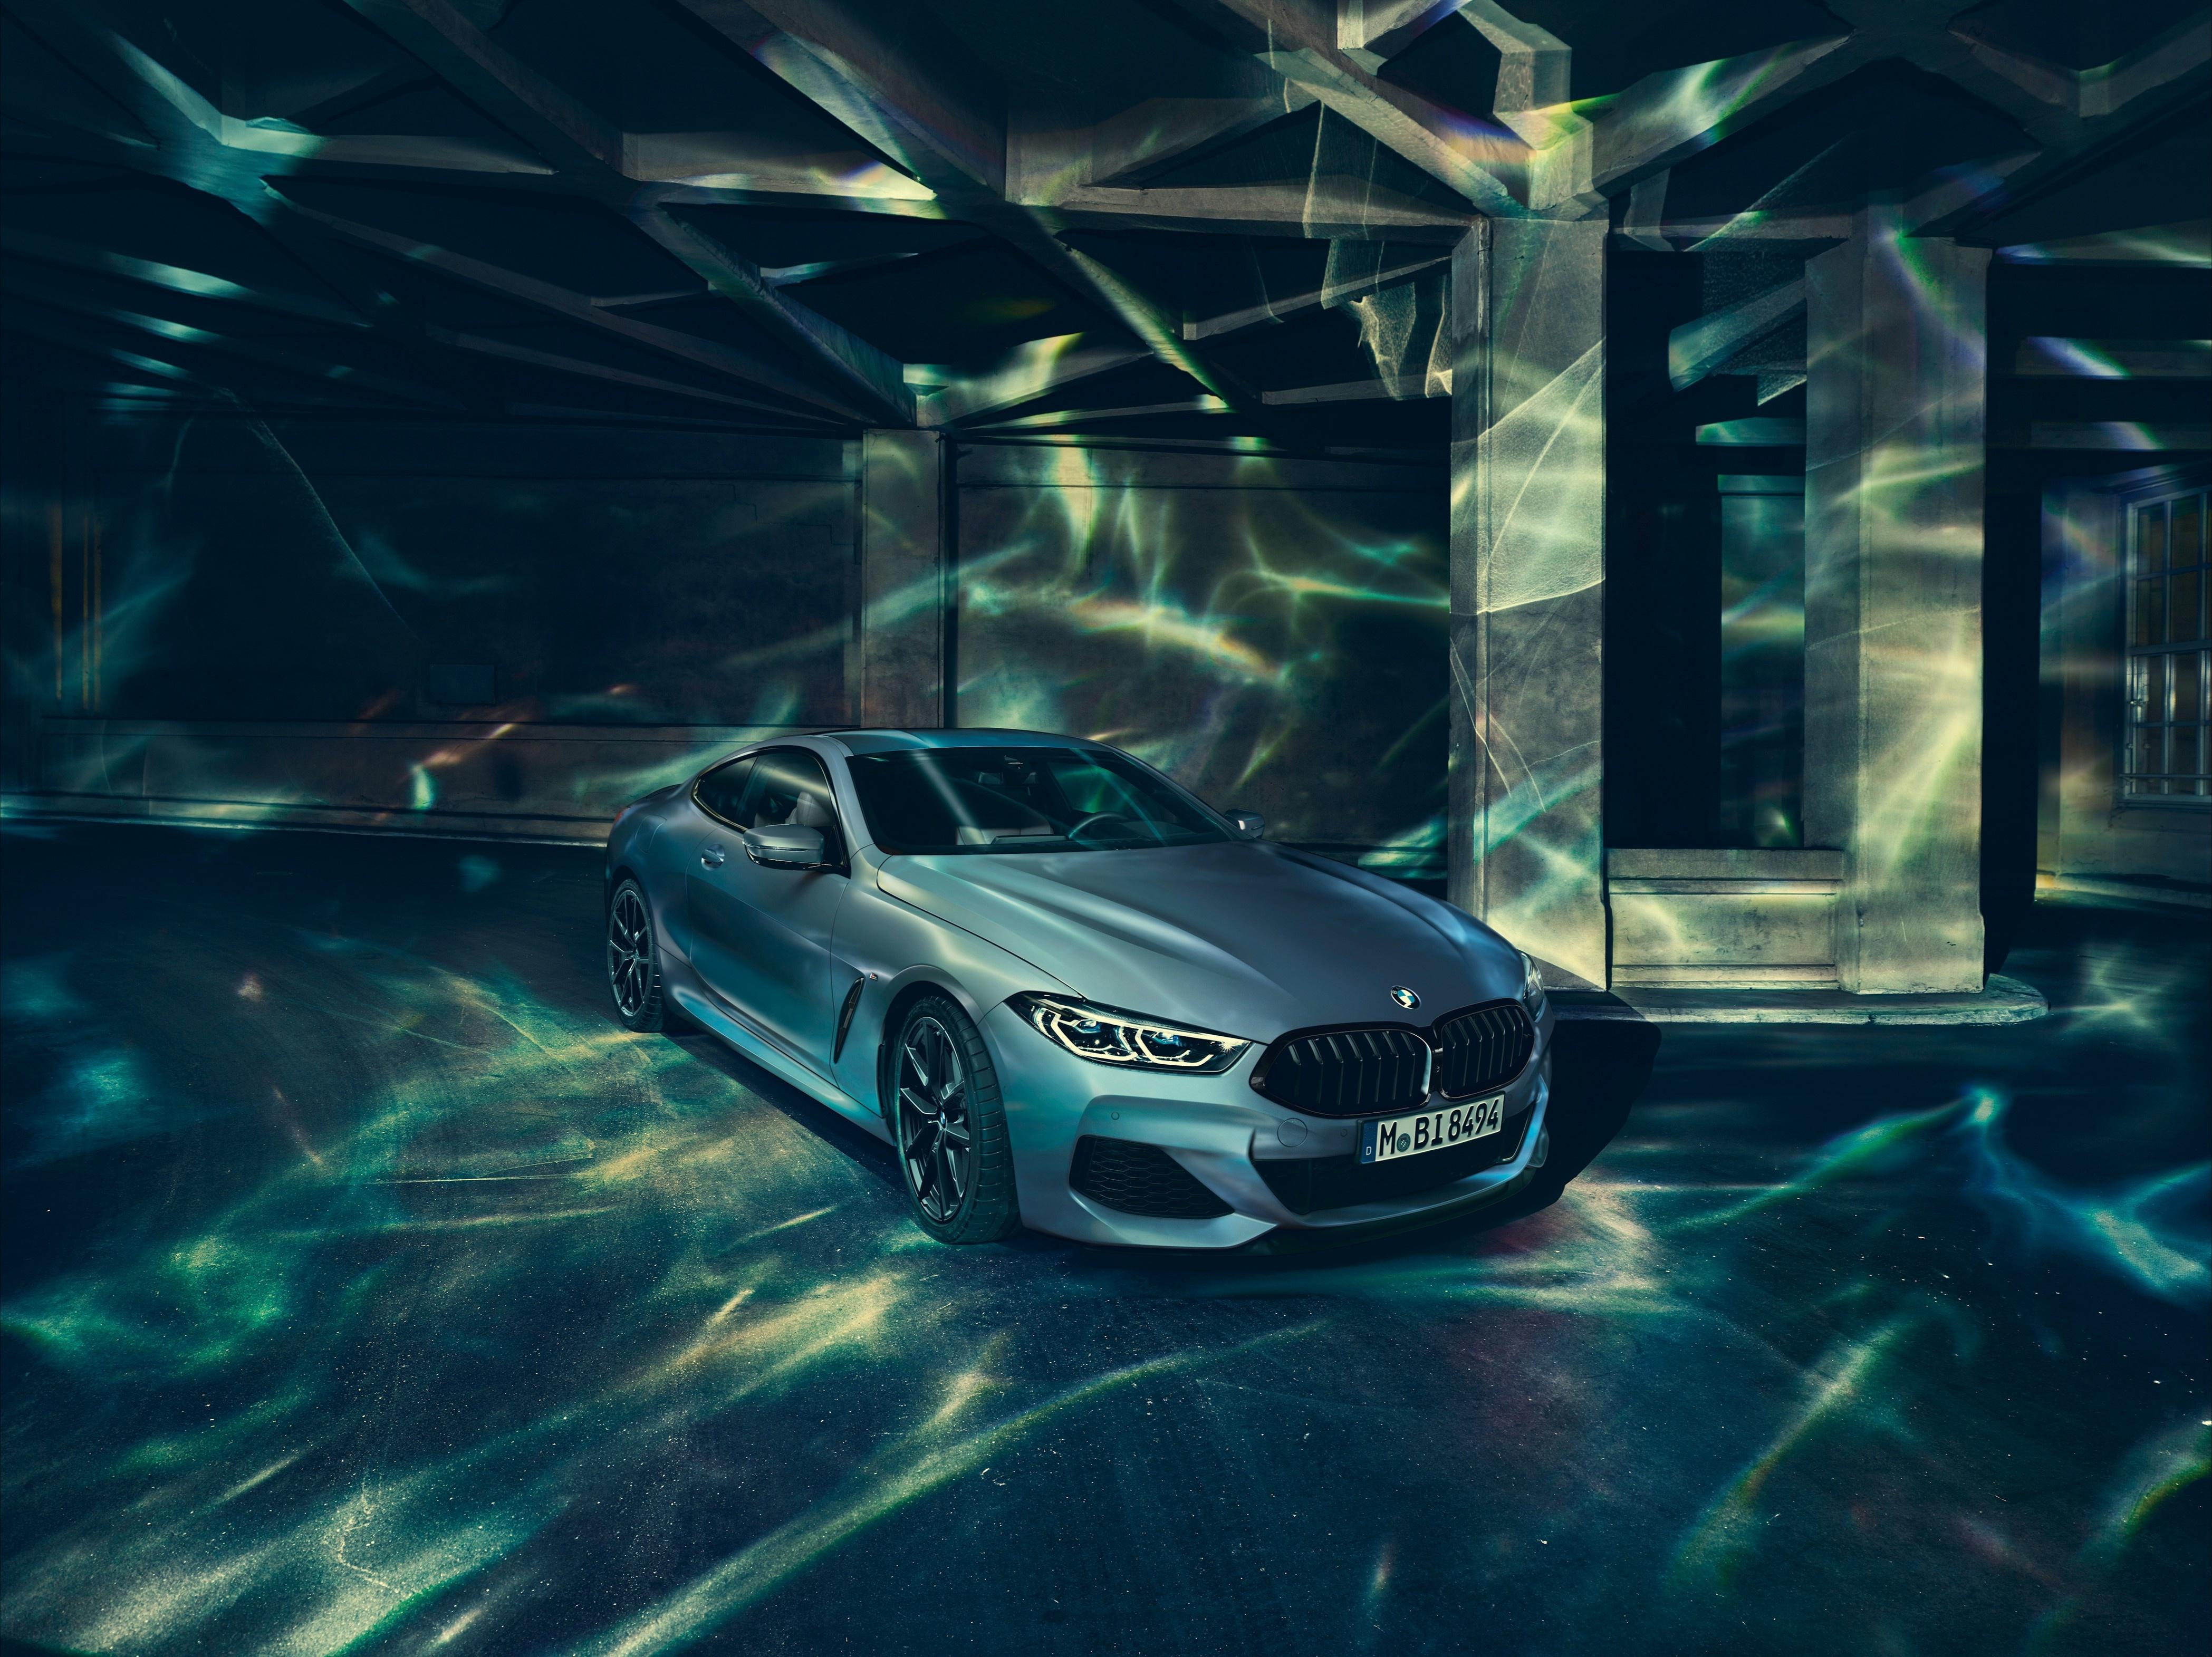 BMW M850i xDrive Coupe First Edition 4k Ultra HD Wallpaper